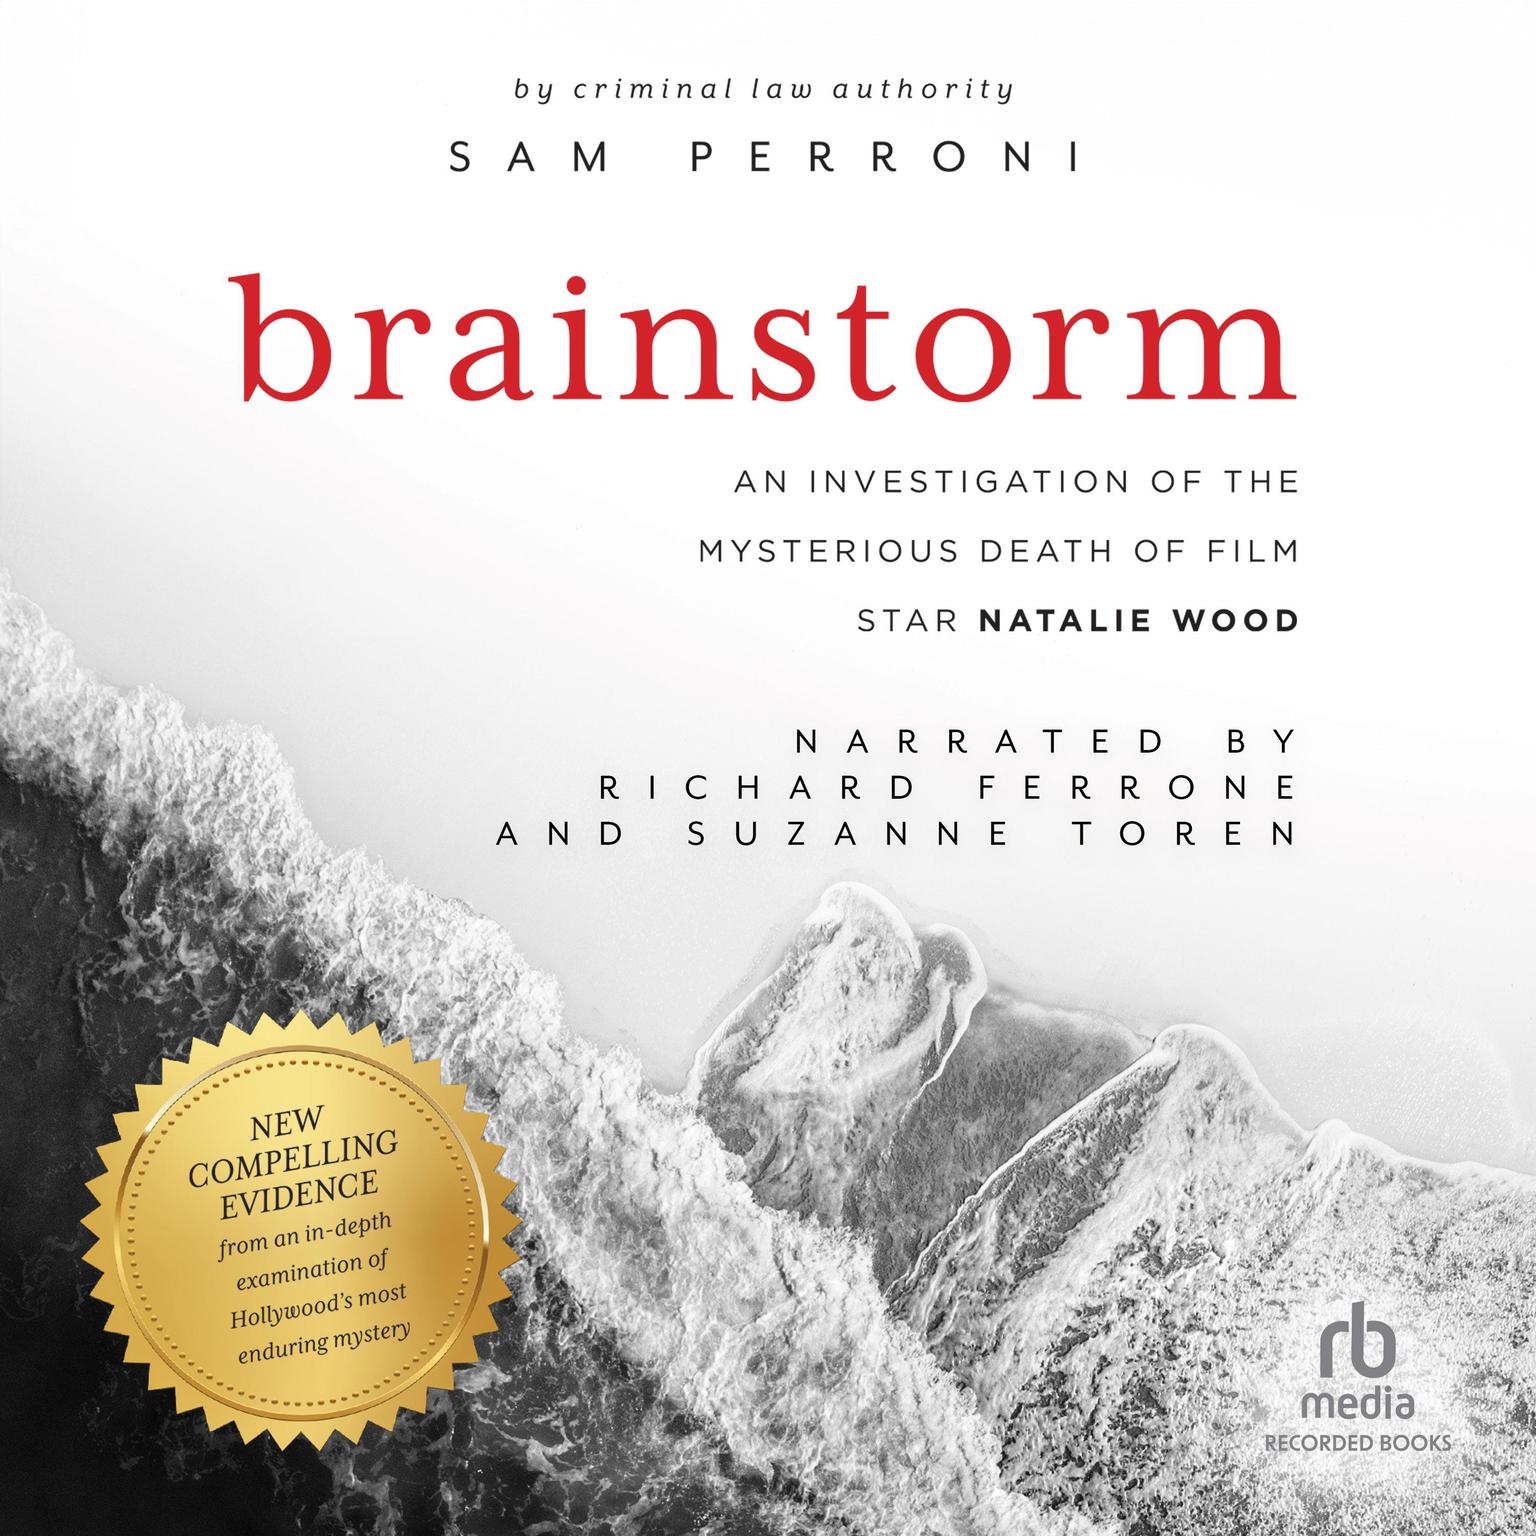 Brainstorm: An Investigation of the Mysterious Death of Film Star Natalie Wood Audiobook, by Sam Perroni